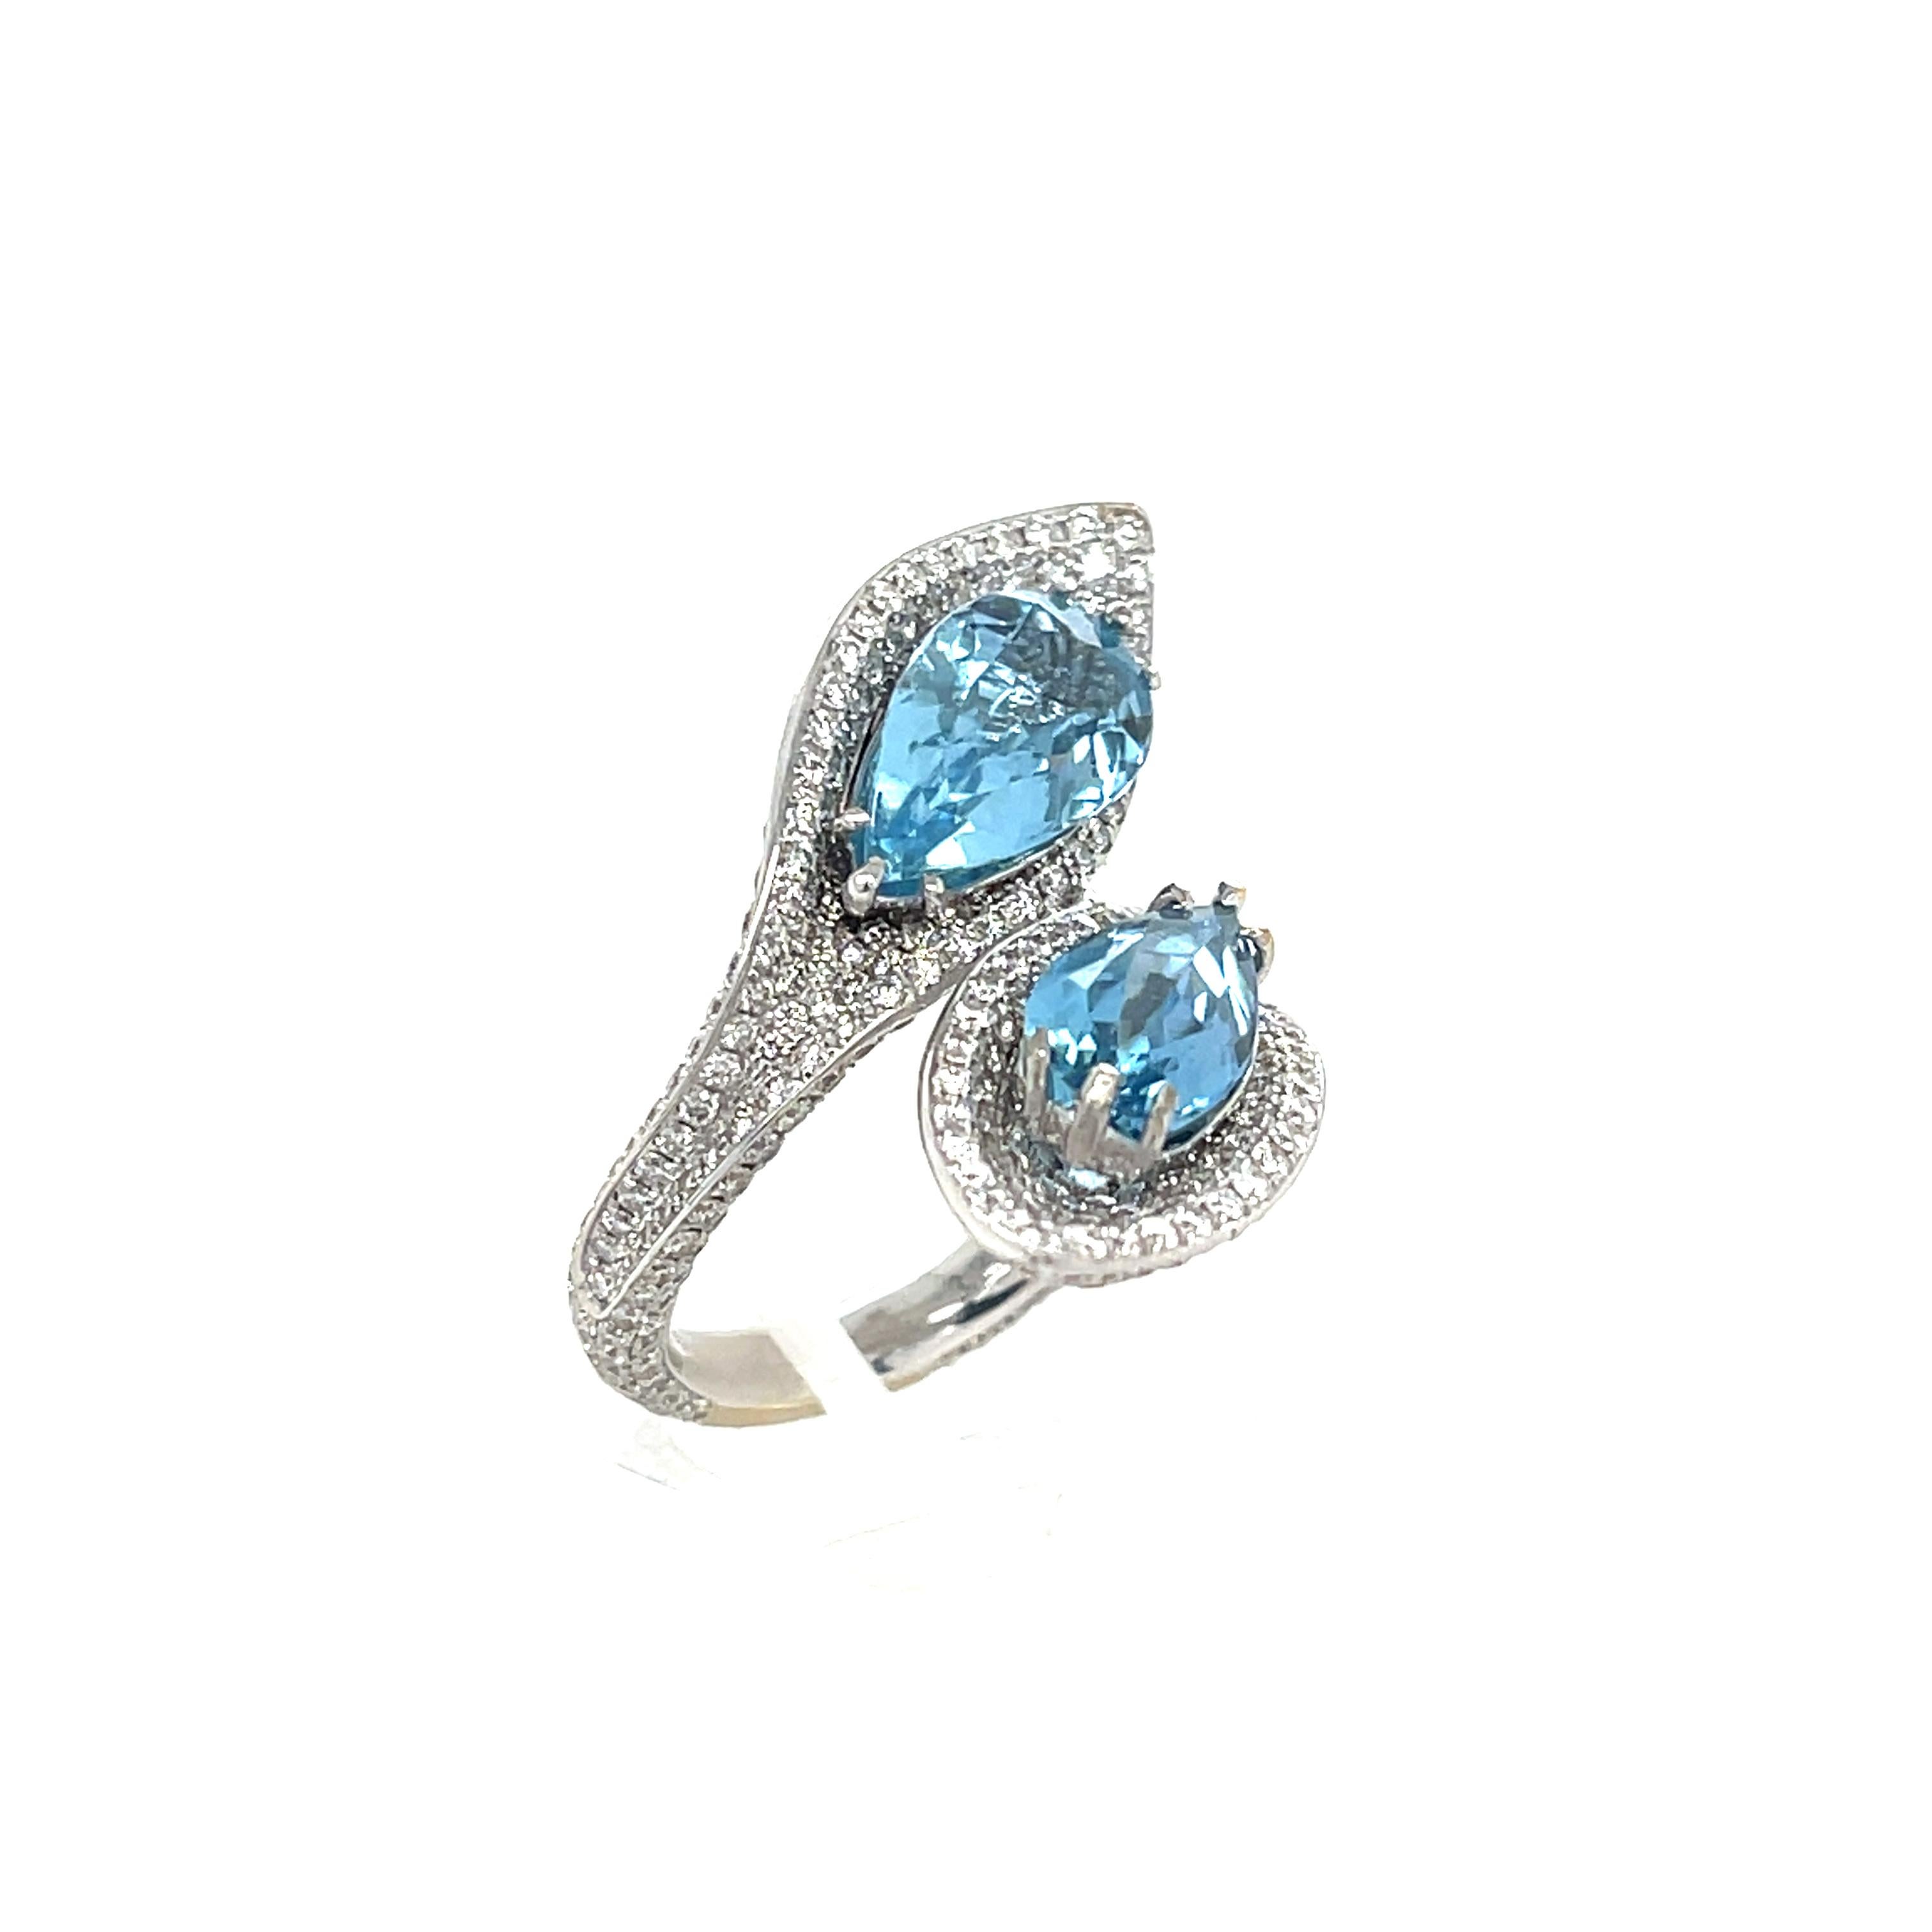 Aquamarine and Diamond Bypass Ring 18K White Gold. The ring features two pear shape aquamarines (3.23ctw) and pave set diamonds (3.13ctw). 
Ring Size 6.5
13.57 grams